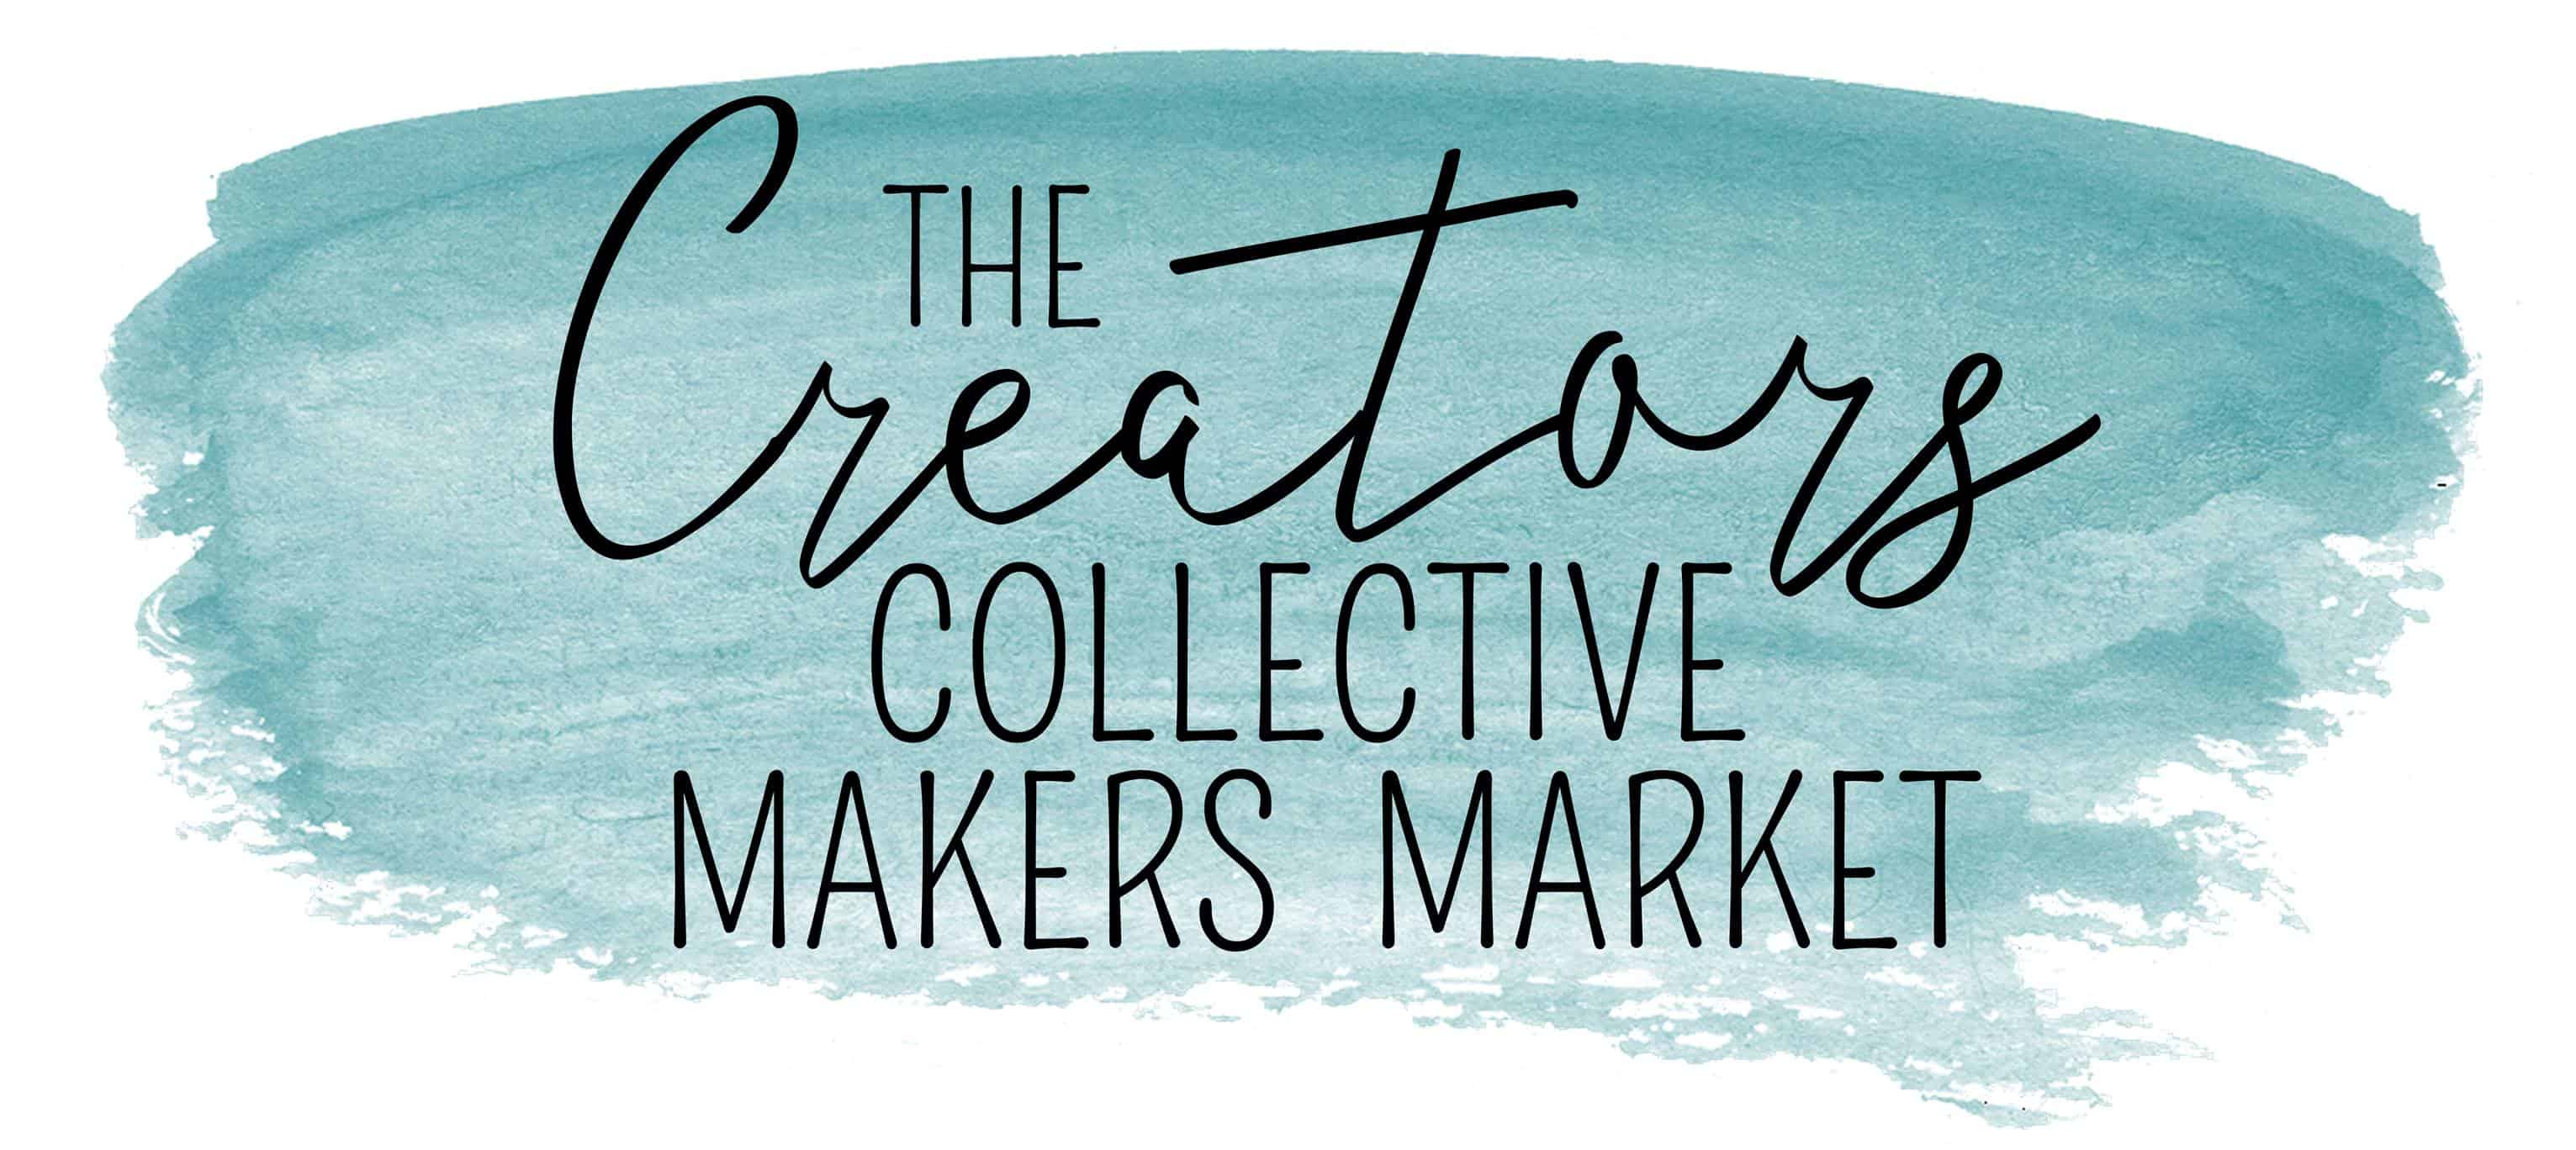 The Creators Collective Makers Market